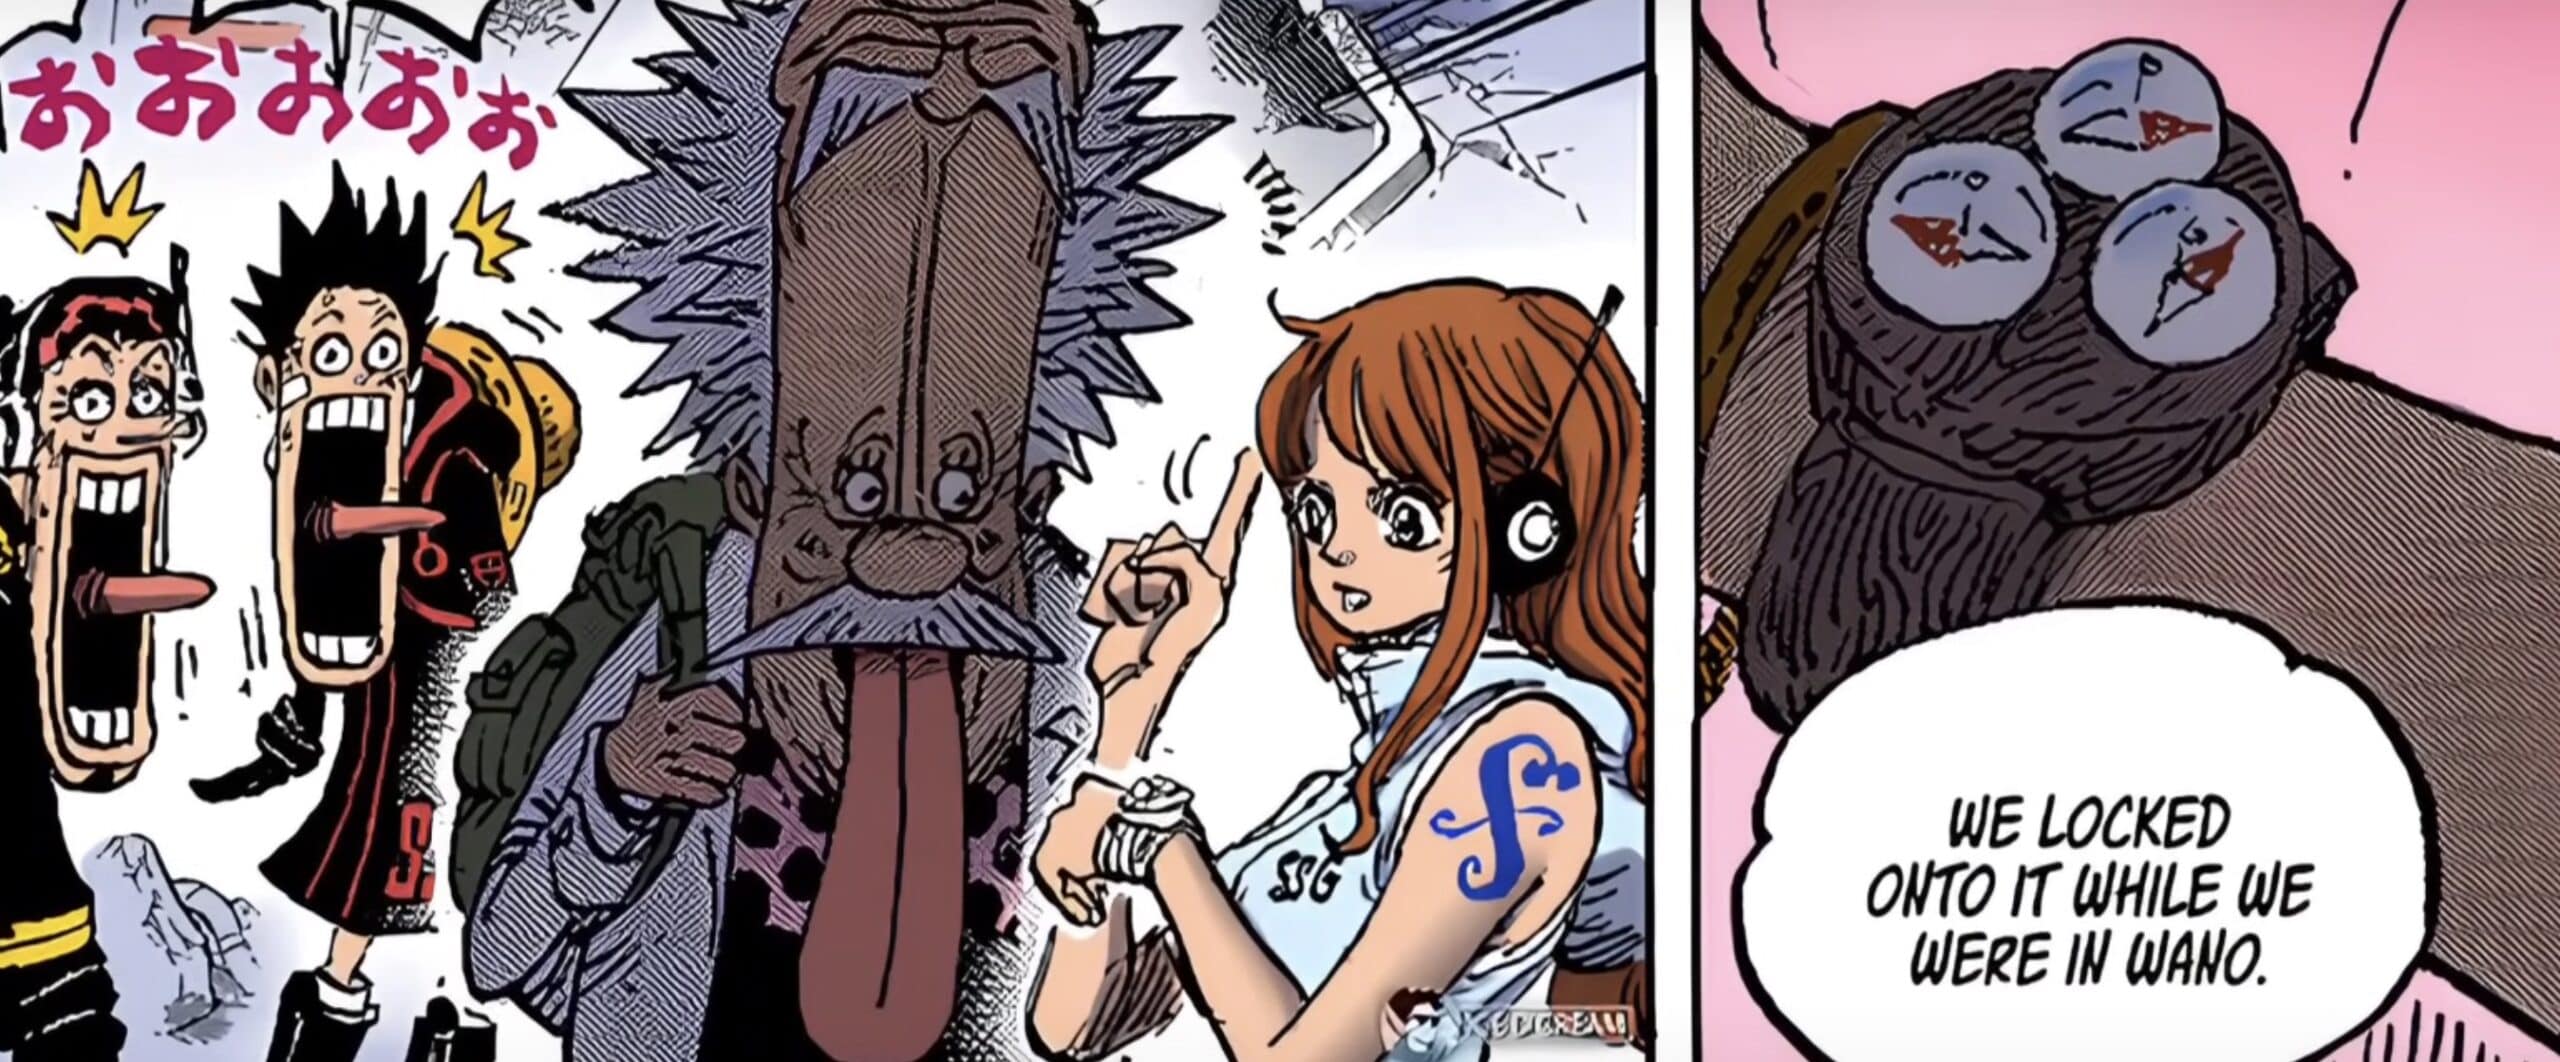 One Piece Manga Gets Emotional With Its Most Heartbreaking